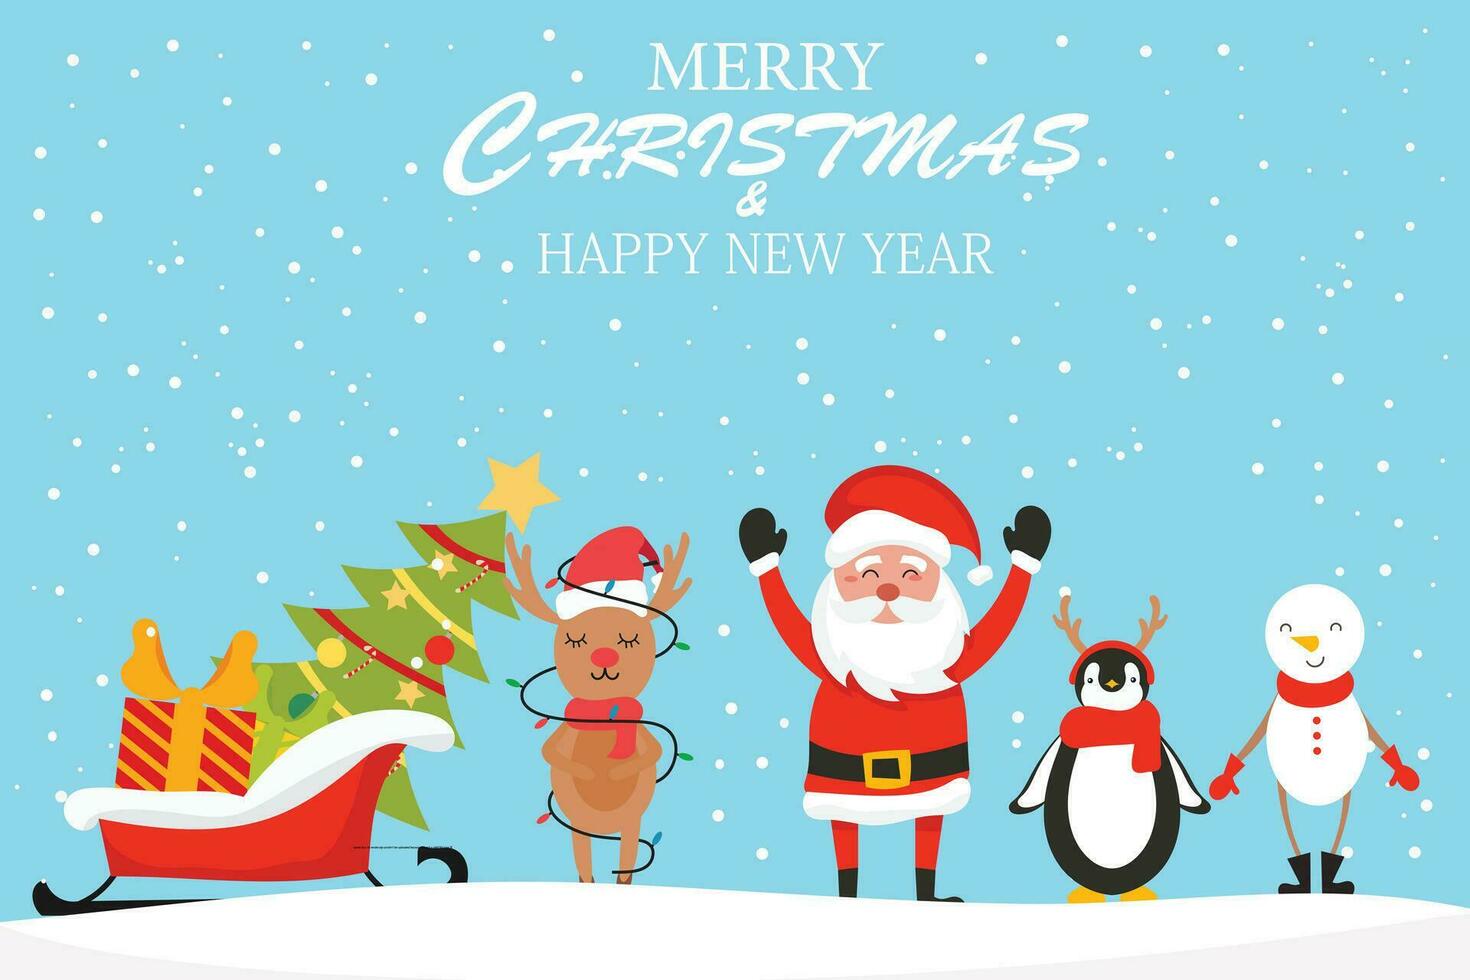 Merry Christmas with cute Santa Claus and ,deer ,penguin cartoon character vector. greeting card vector